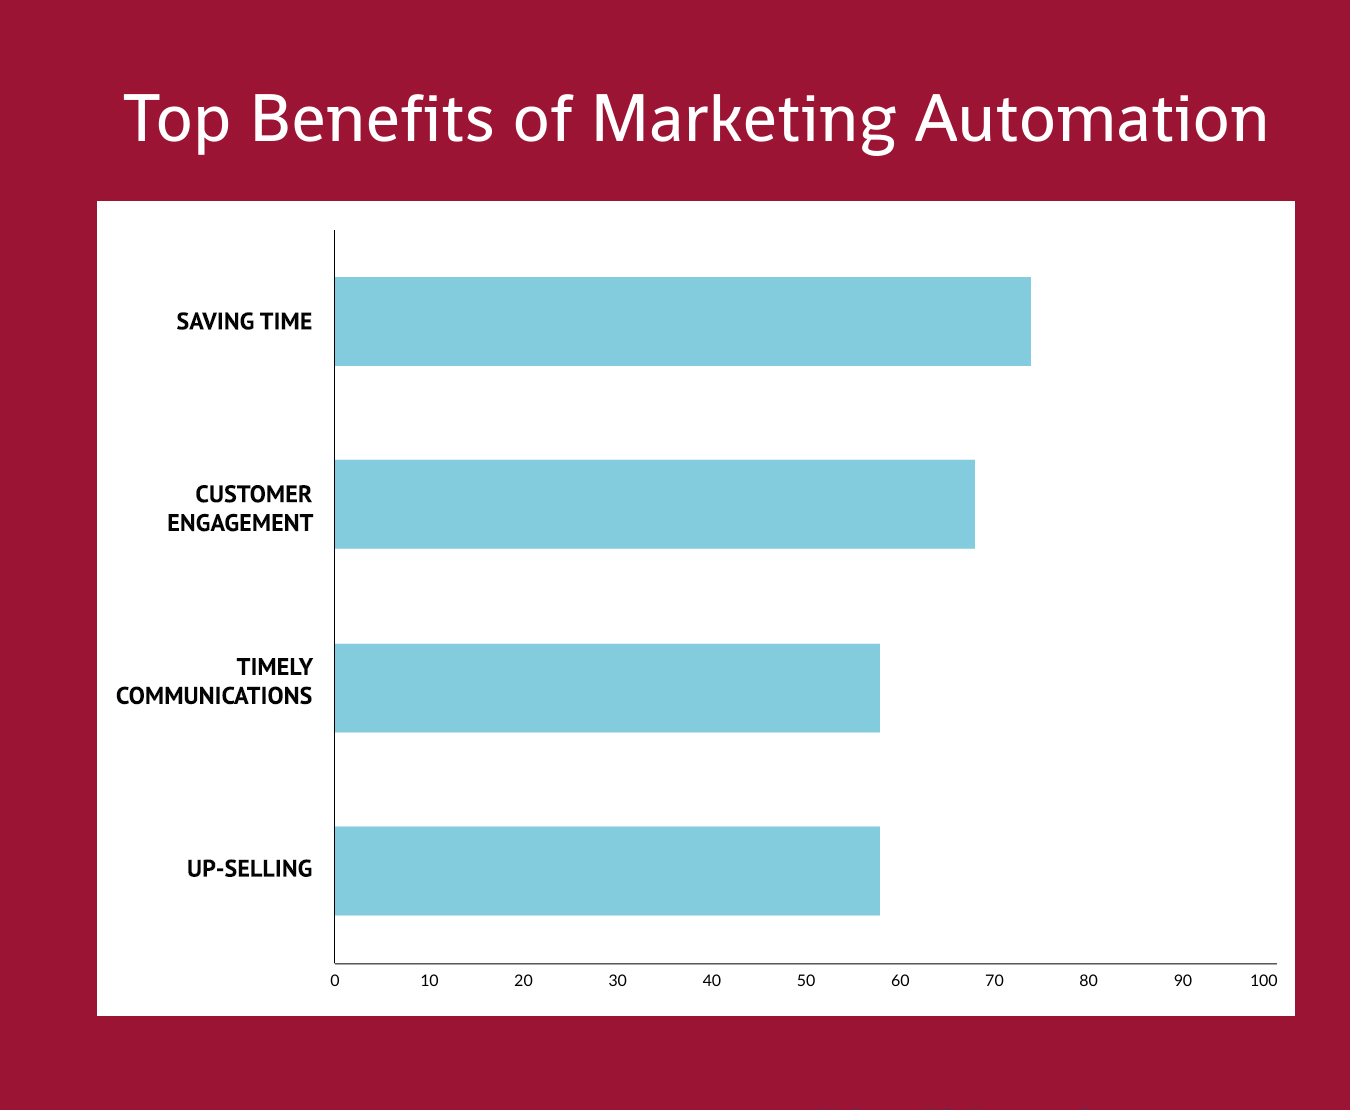 B2B digital marketing strategies rely on marketing automation. The top benefits of marketing automation are saving time, customer engagement, timely communication, and up-selling..